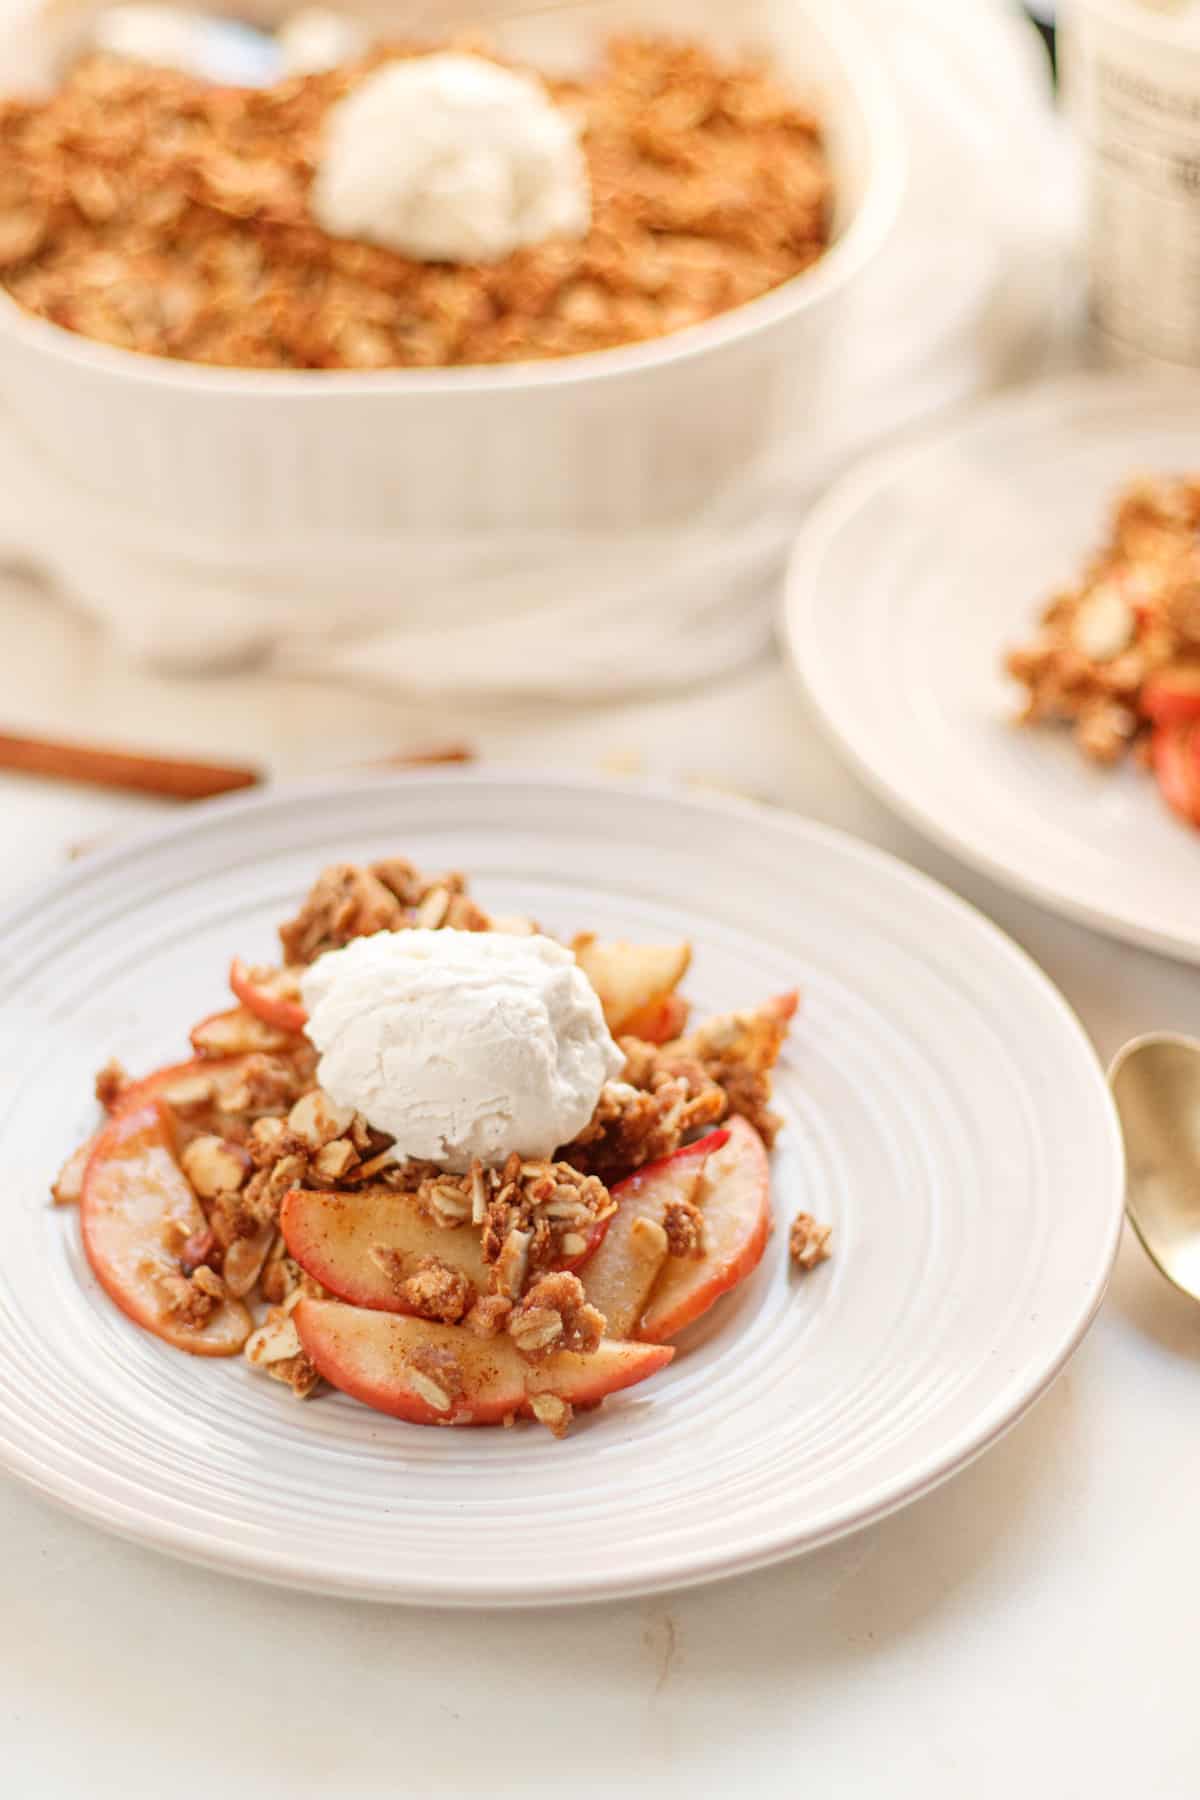 Apple crisp on a white plate, topped with vegan sugar-free ice cream.